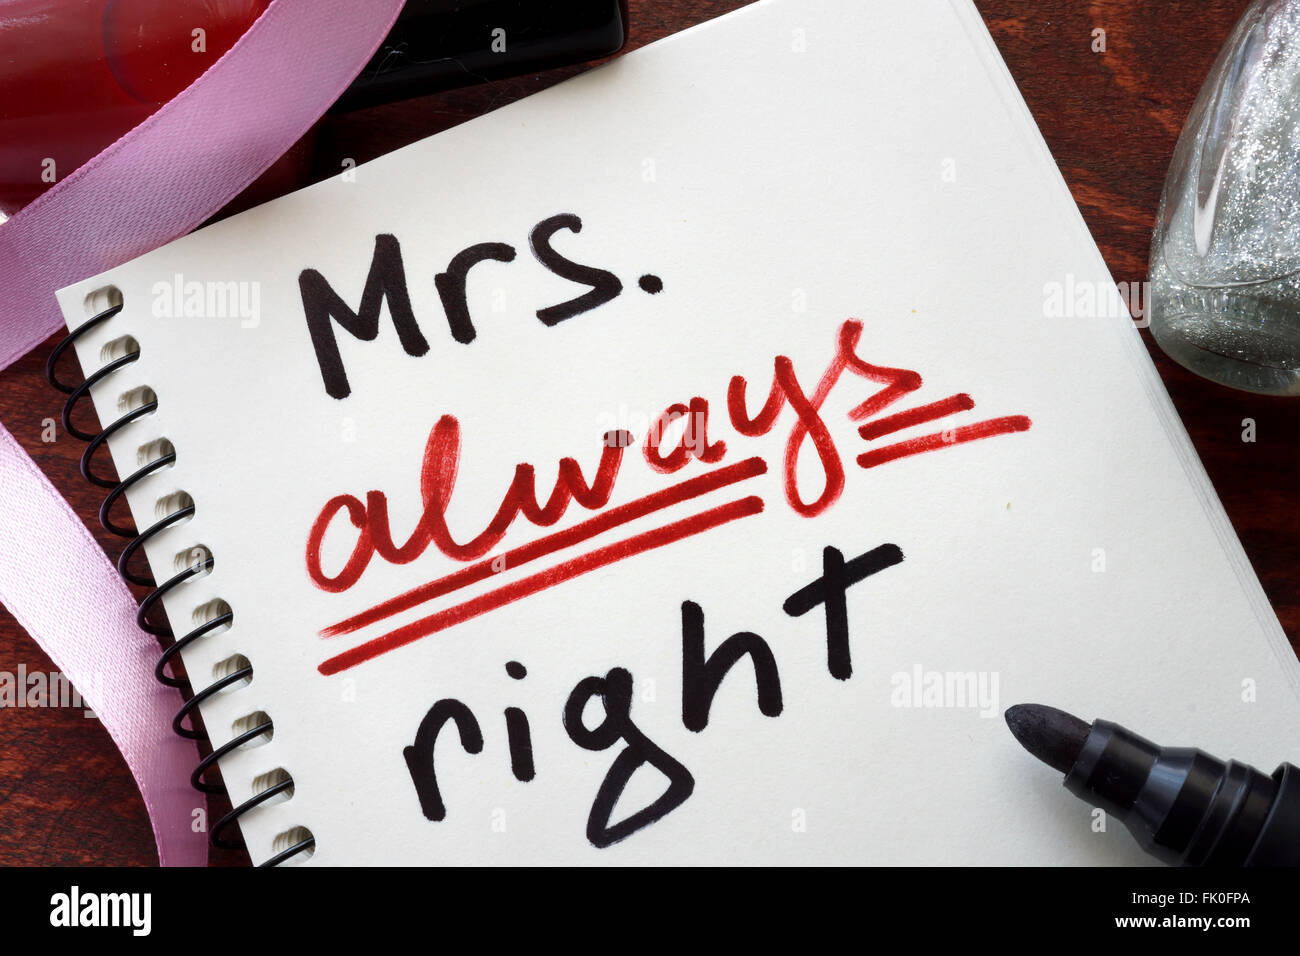 Mrs always right concept  written in a notebook on a wooden table. Stock Photo